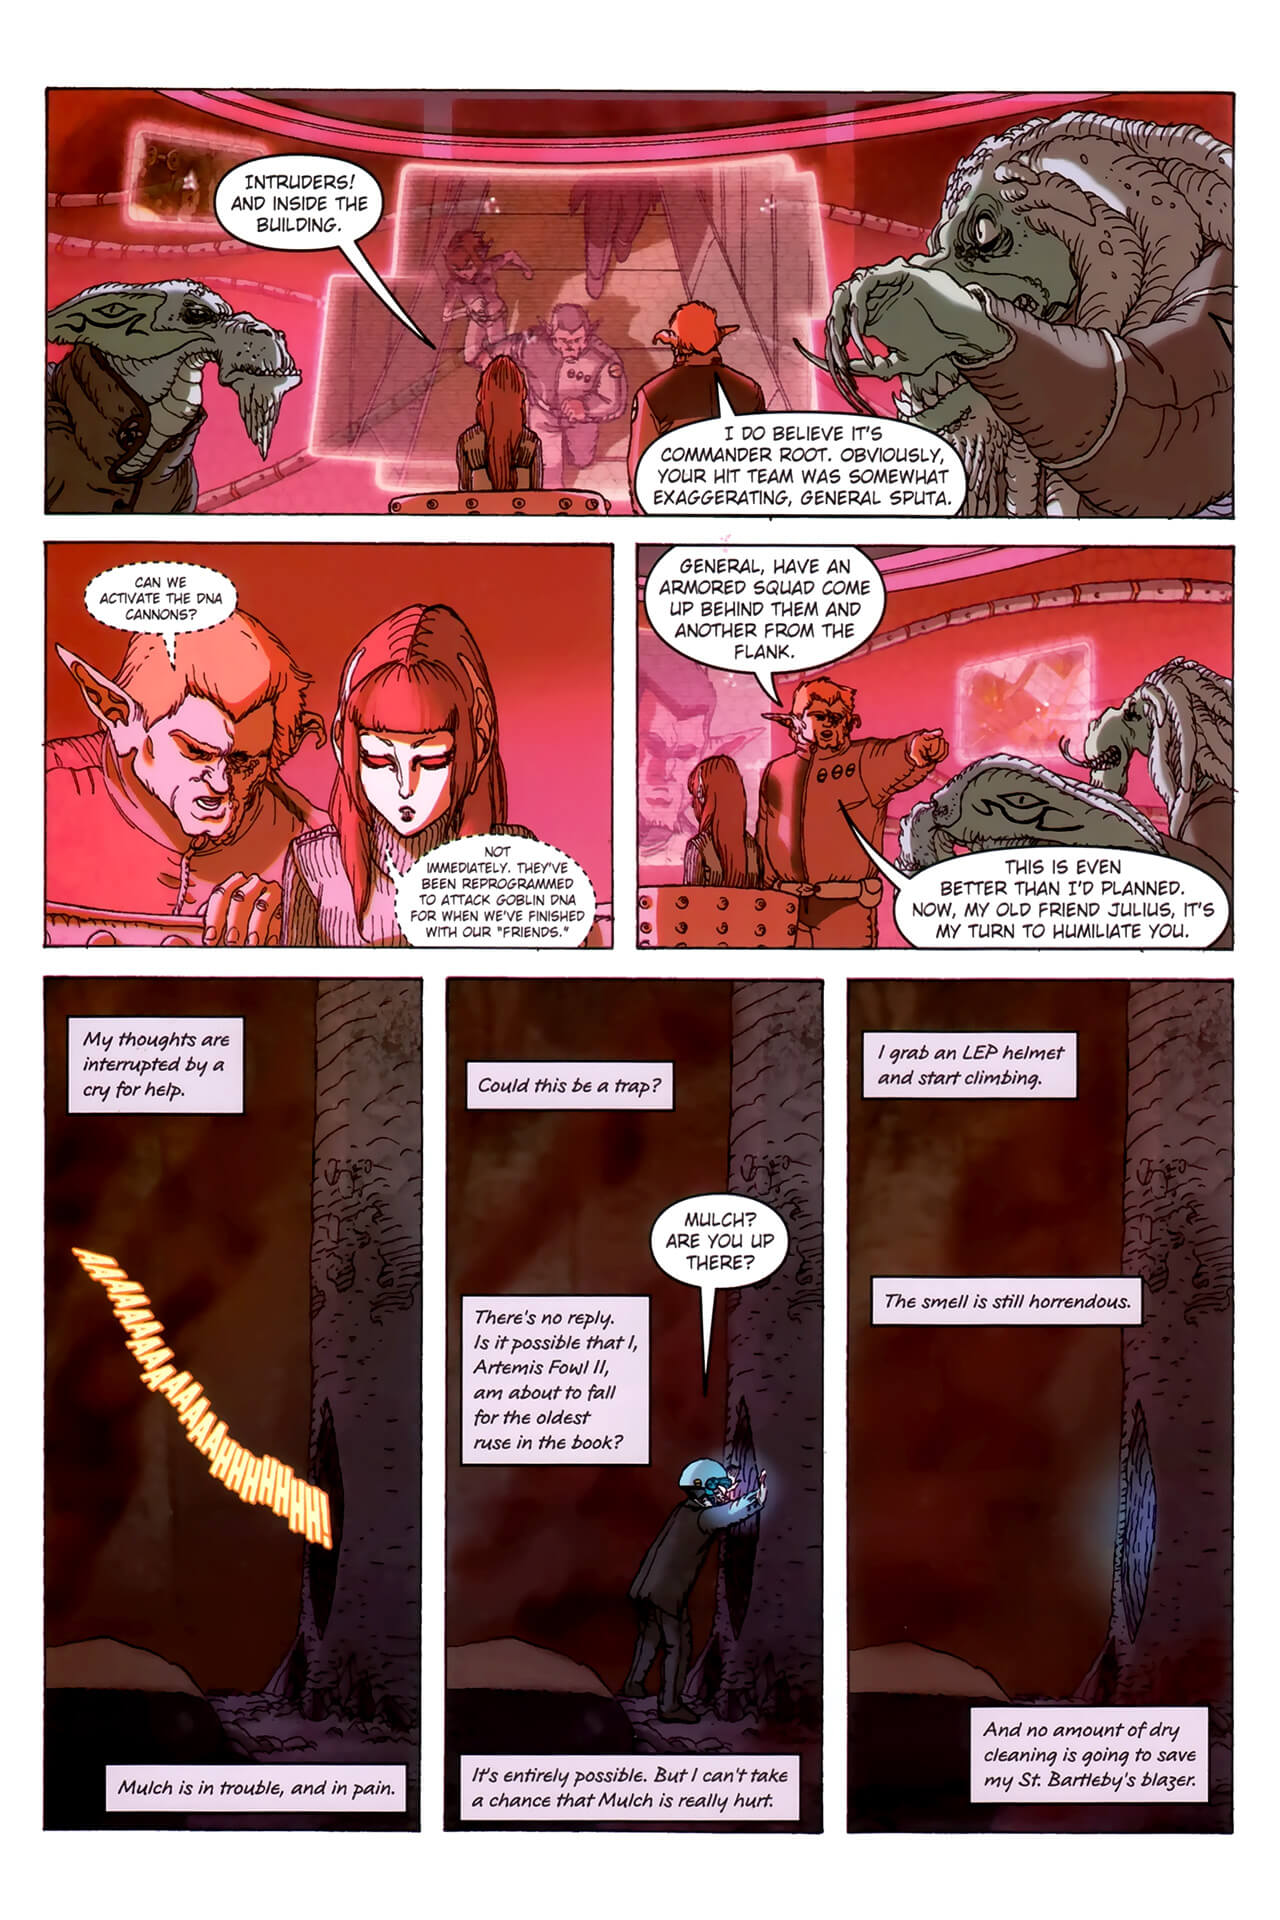 page 104 of artemis fowl the arctic incident graphic novel